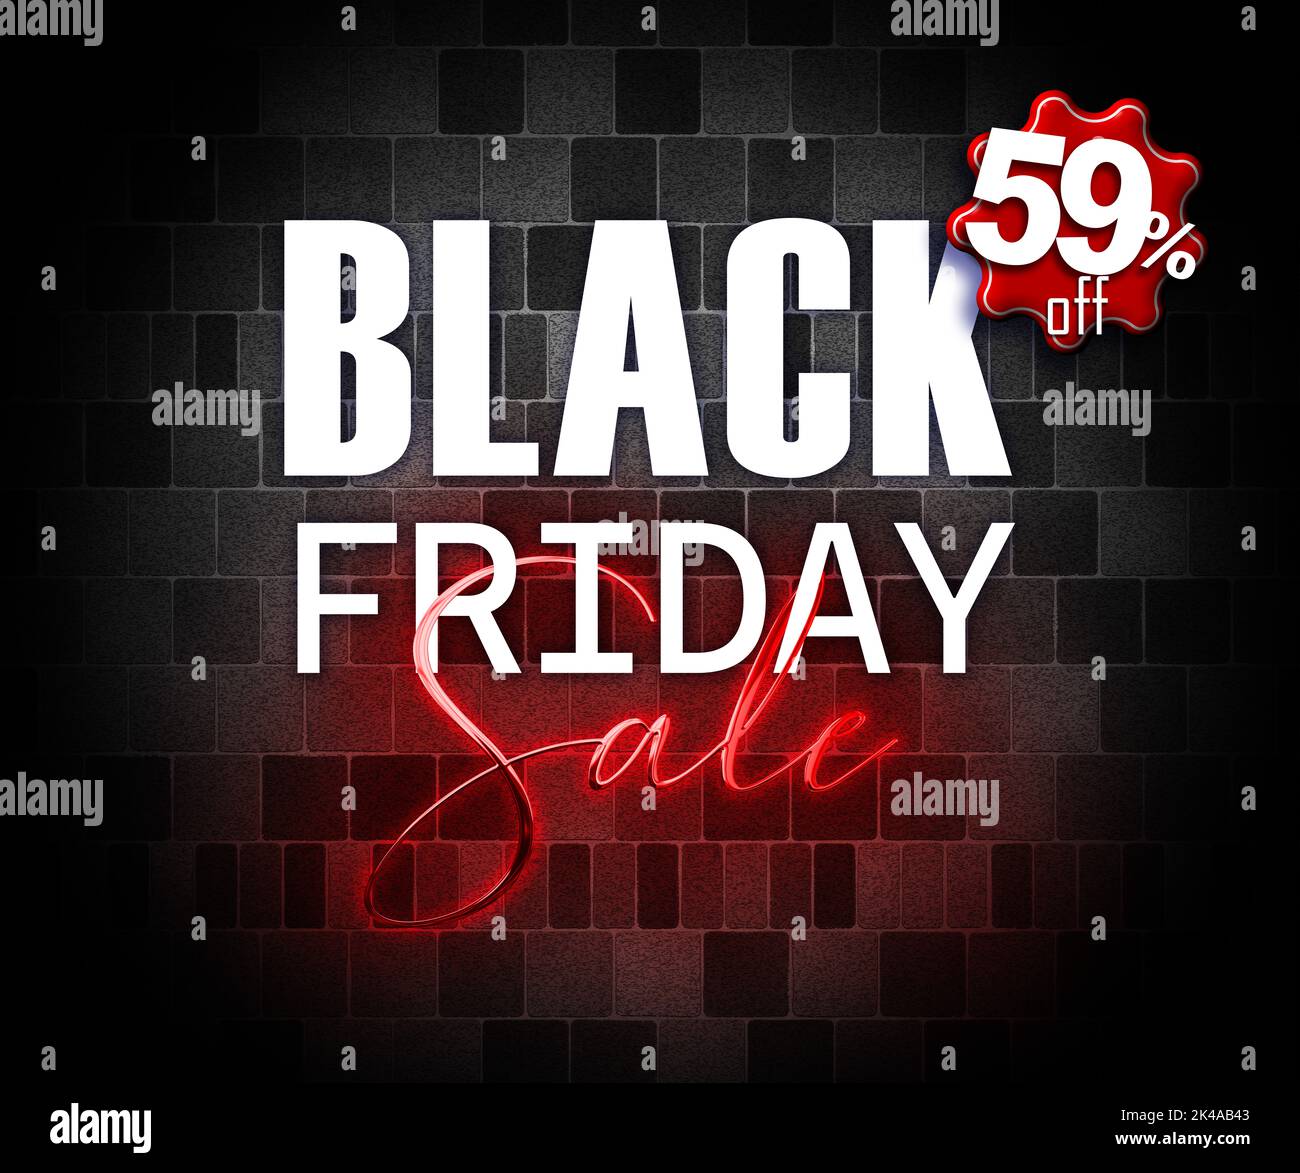 illustration with 3d elements black friday promotion banner 59 percent off sales increase Stock Photo